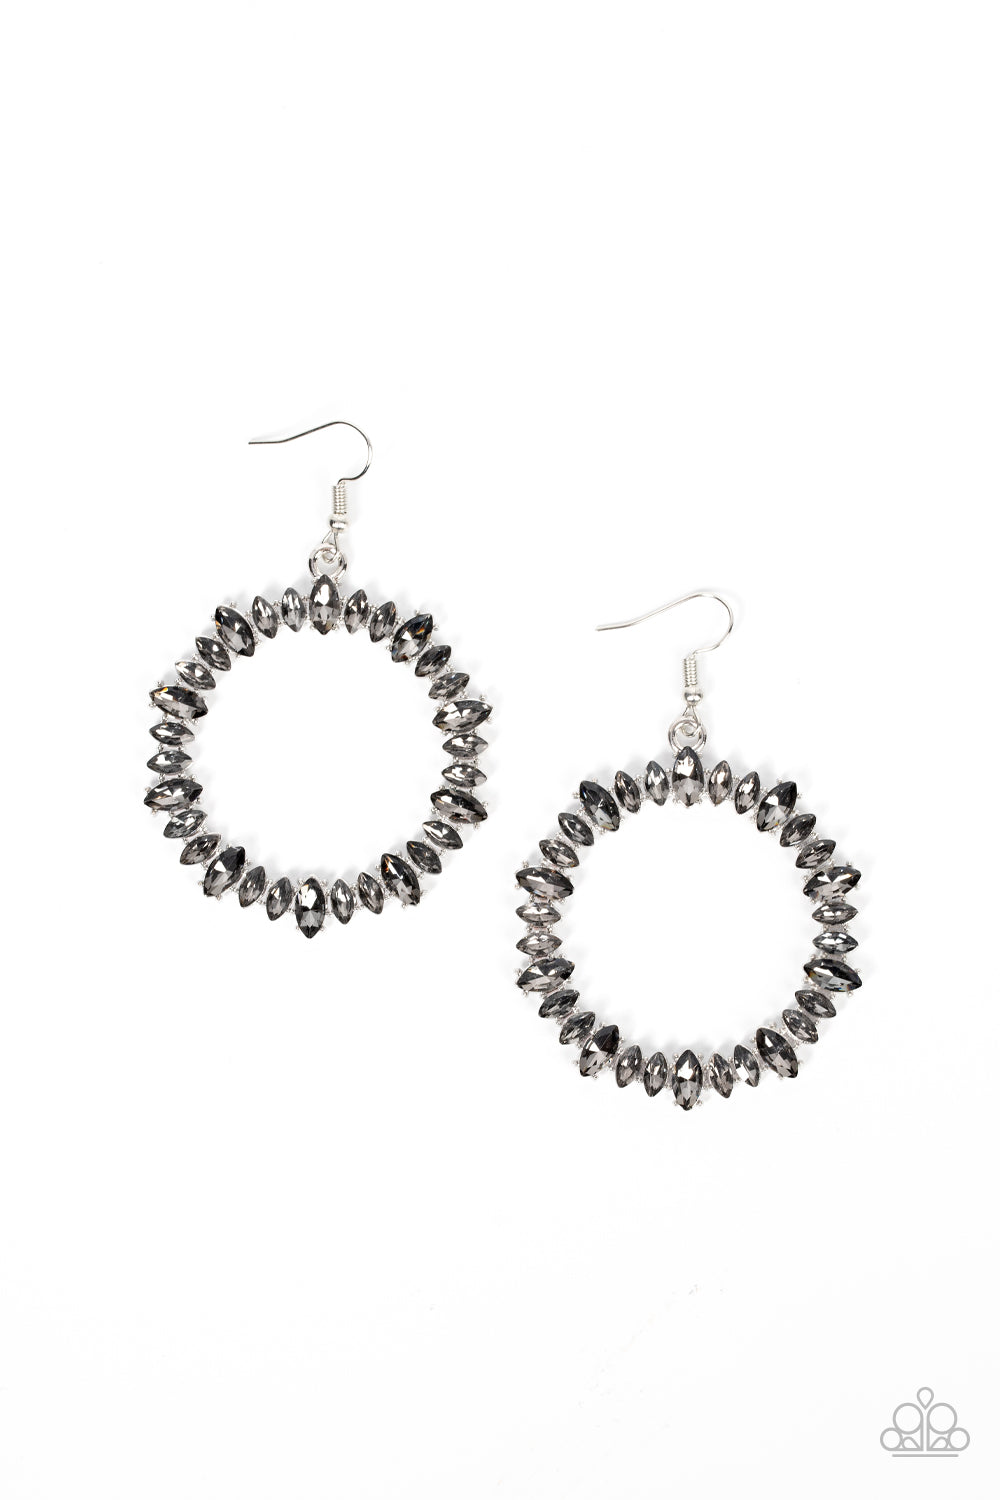 Glowing Reviews Silver Earring - Paparazzi Accessories  Encased in pronged silver fittings, a smoky collection of marquise cut rhinestones delicately coalesce into a brilliant hoop for a show-stopping finish. Earring attaches to a standard fishhook fitting.  Sold as one pair of earrings.